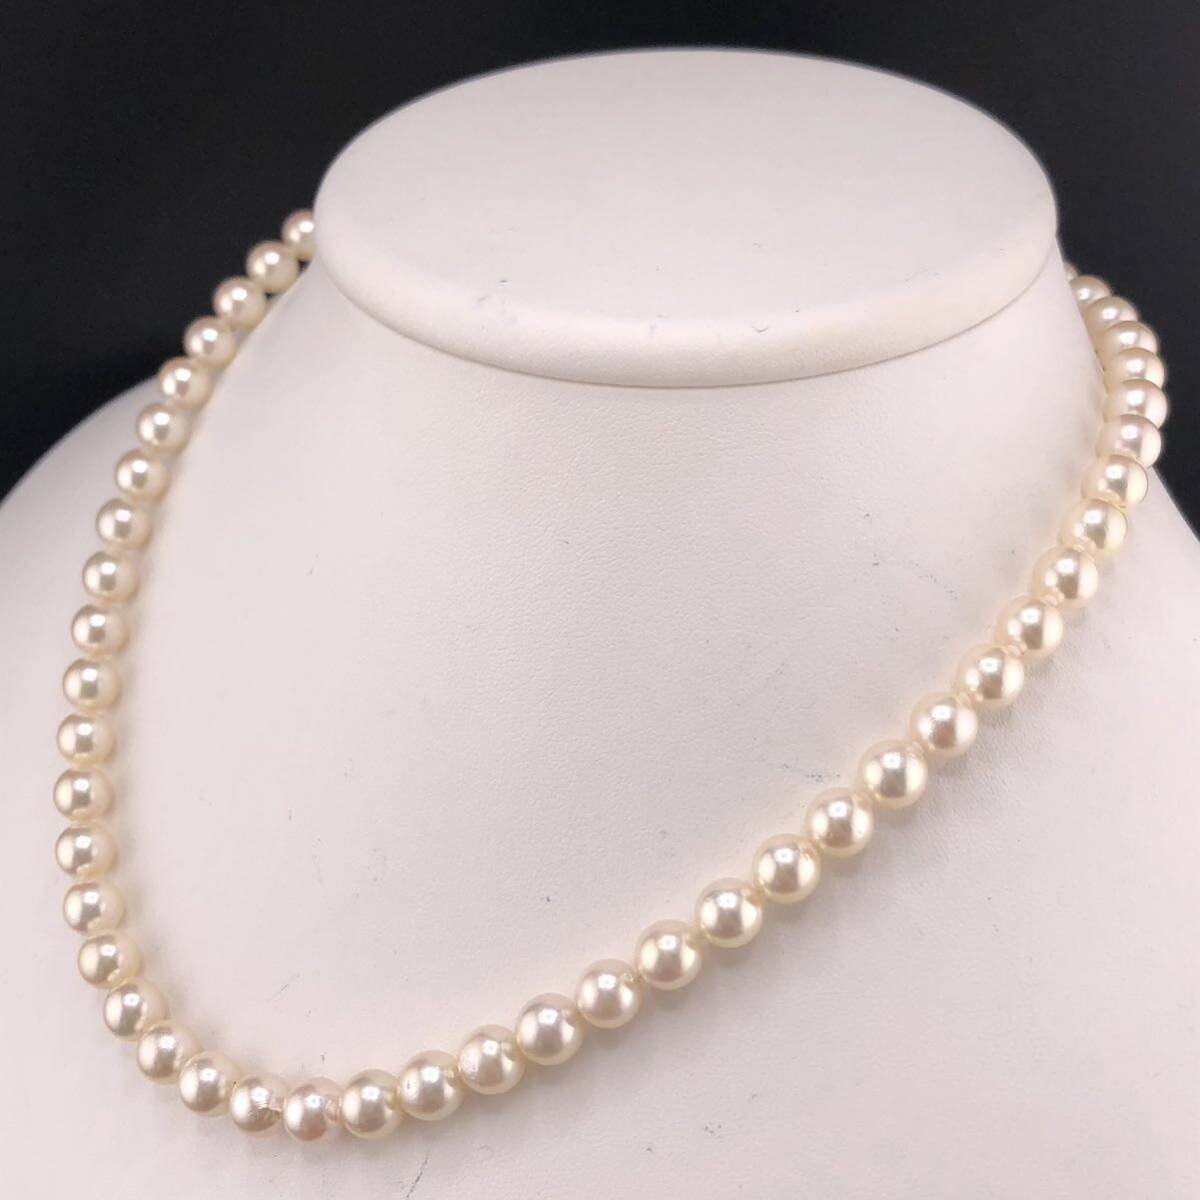 P04-0018 アコヤパールネックレス 7.0mm~7.5mm 42cm 33g ( アコヤ真珠 Pearl necklace SILVER )_画像2